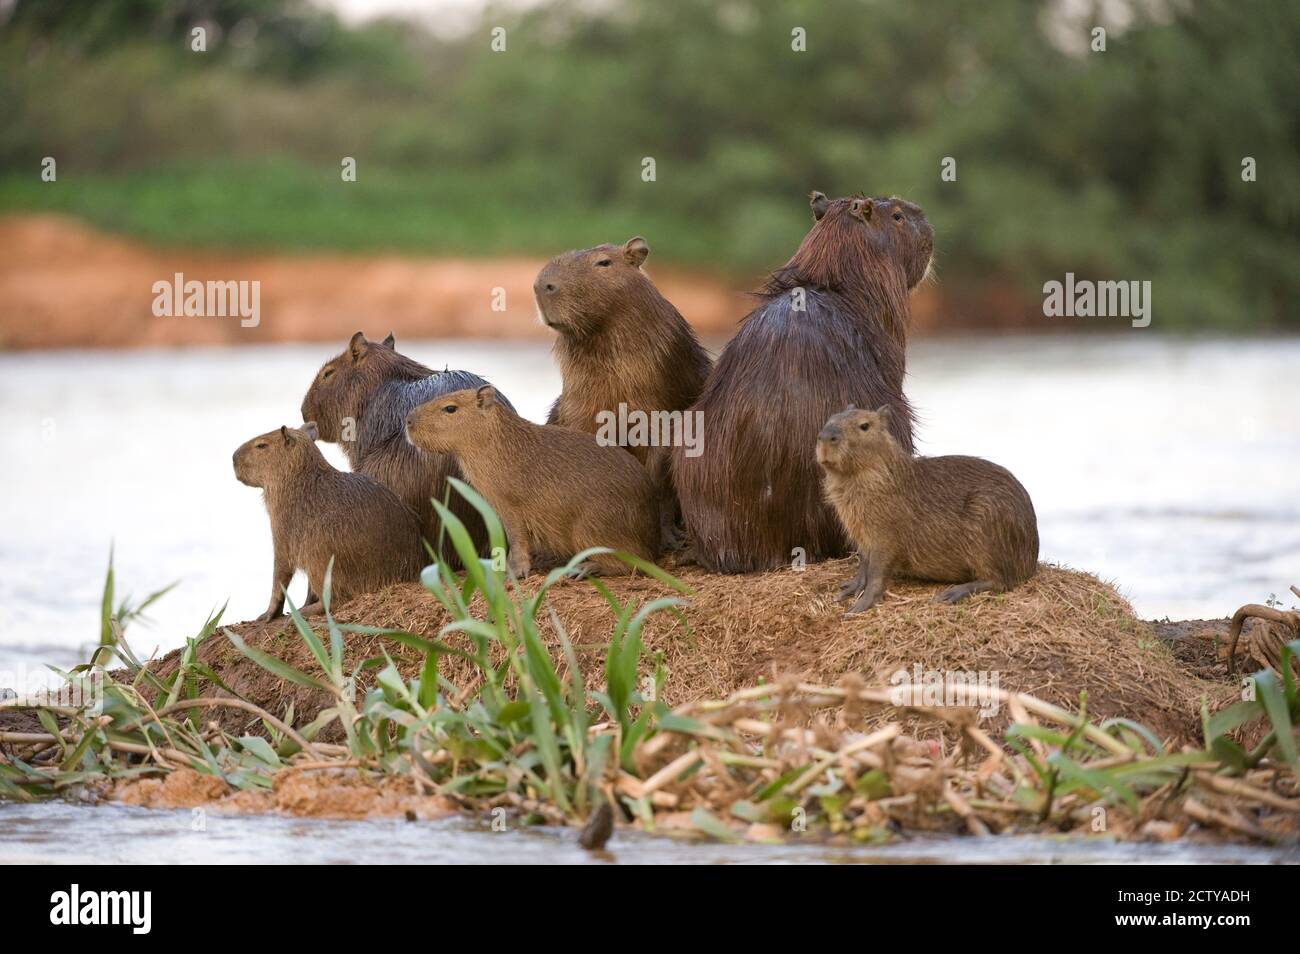 Capybara (Hydrochoerus hydrochaeris) family on a rock, Three Brothers River, Meeting of the Waters State Park, Pantanal Wetlands, Brazil Stock Photo